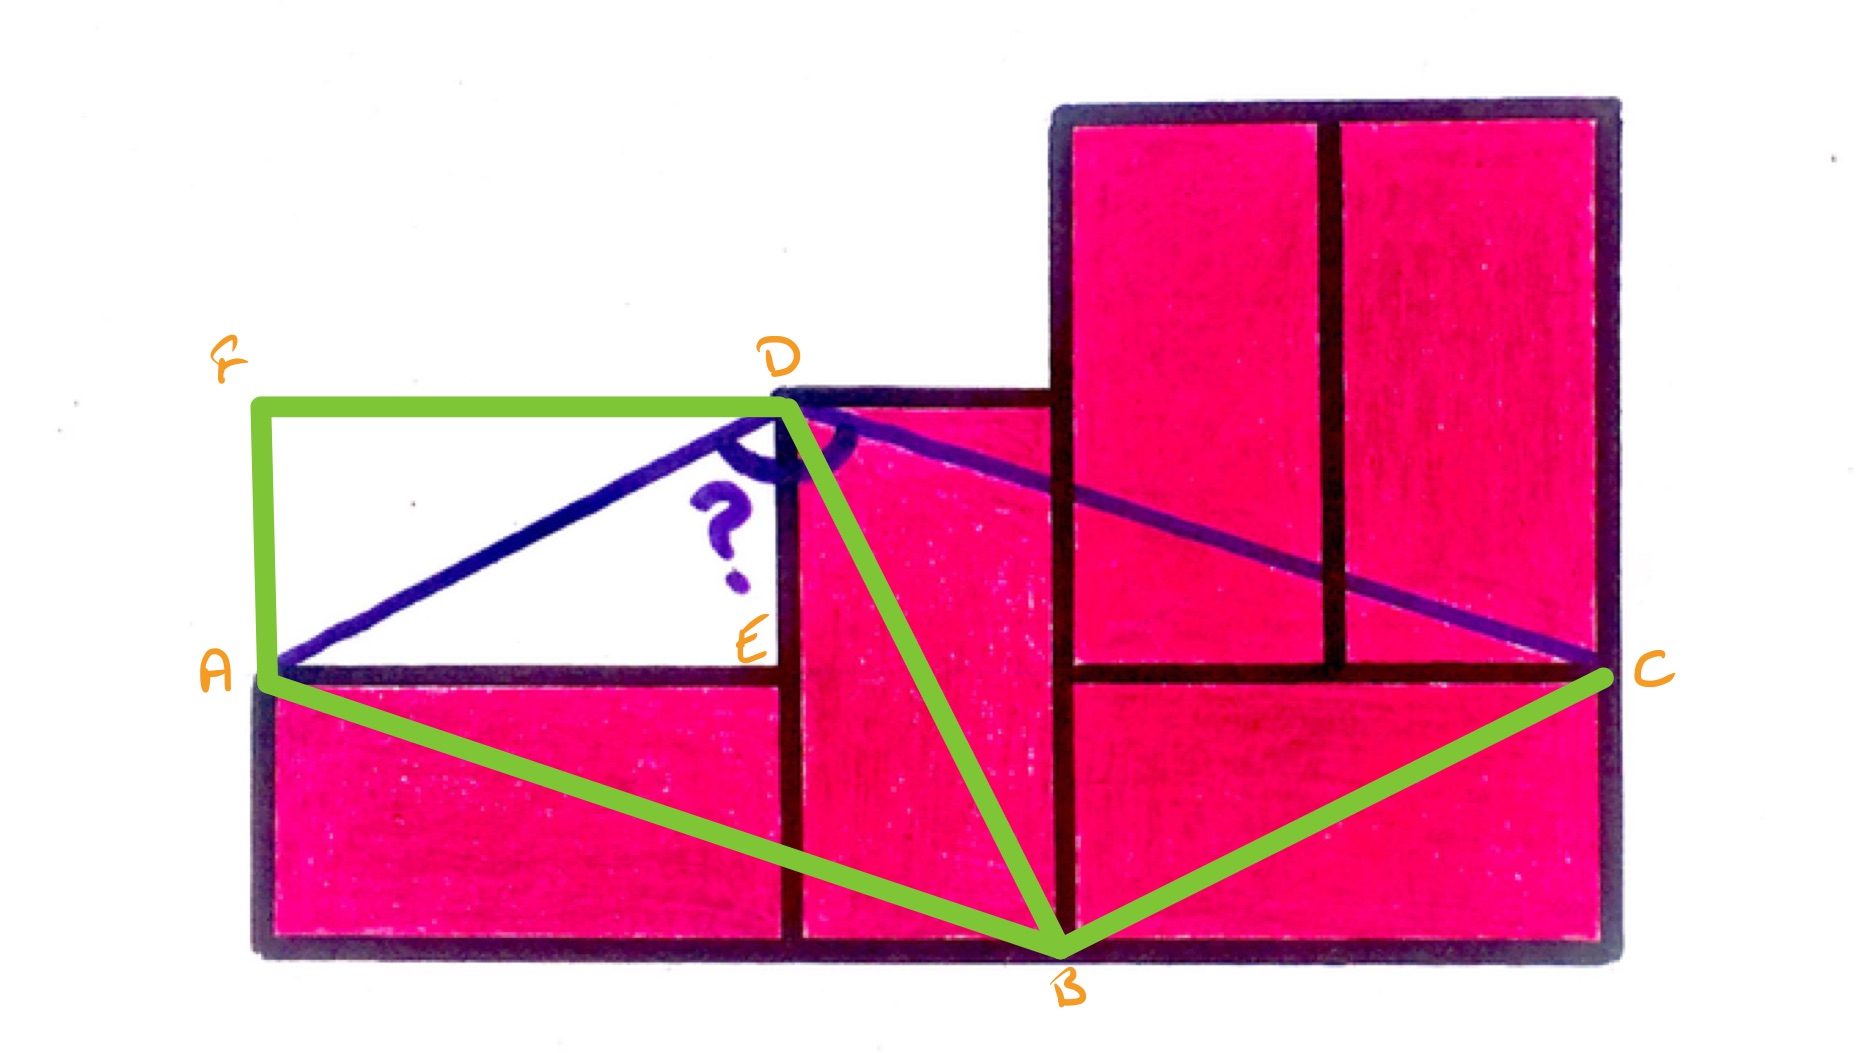 Five congruent rectangles labelled